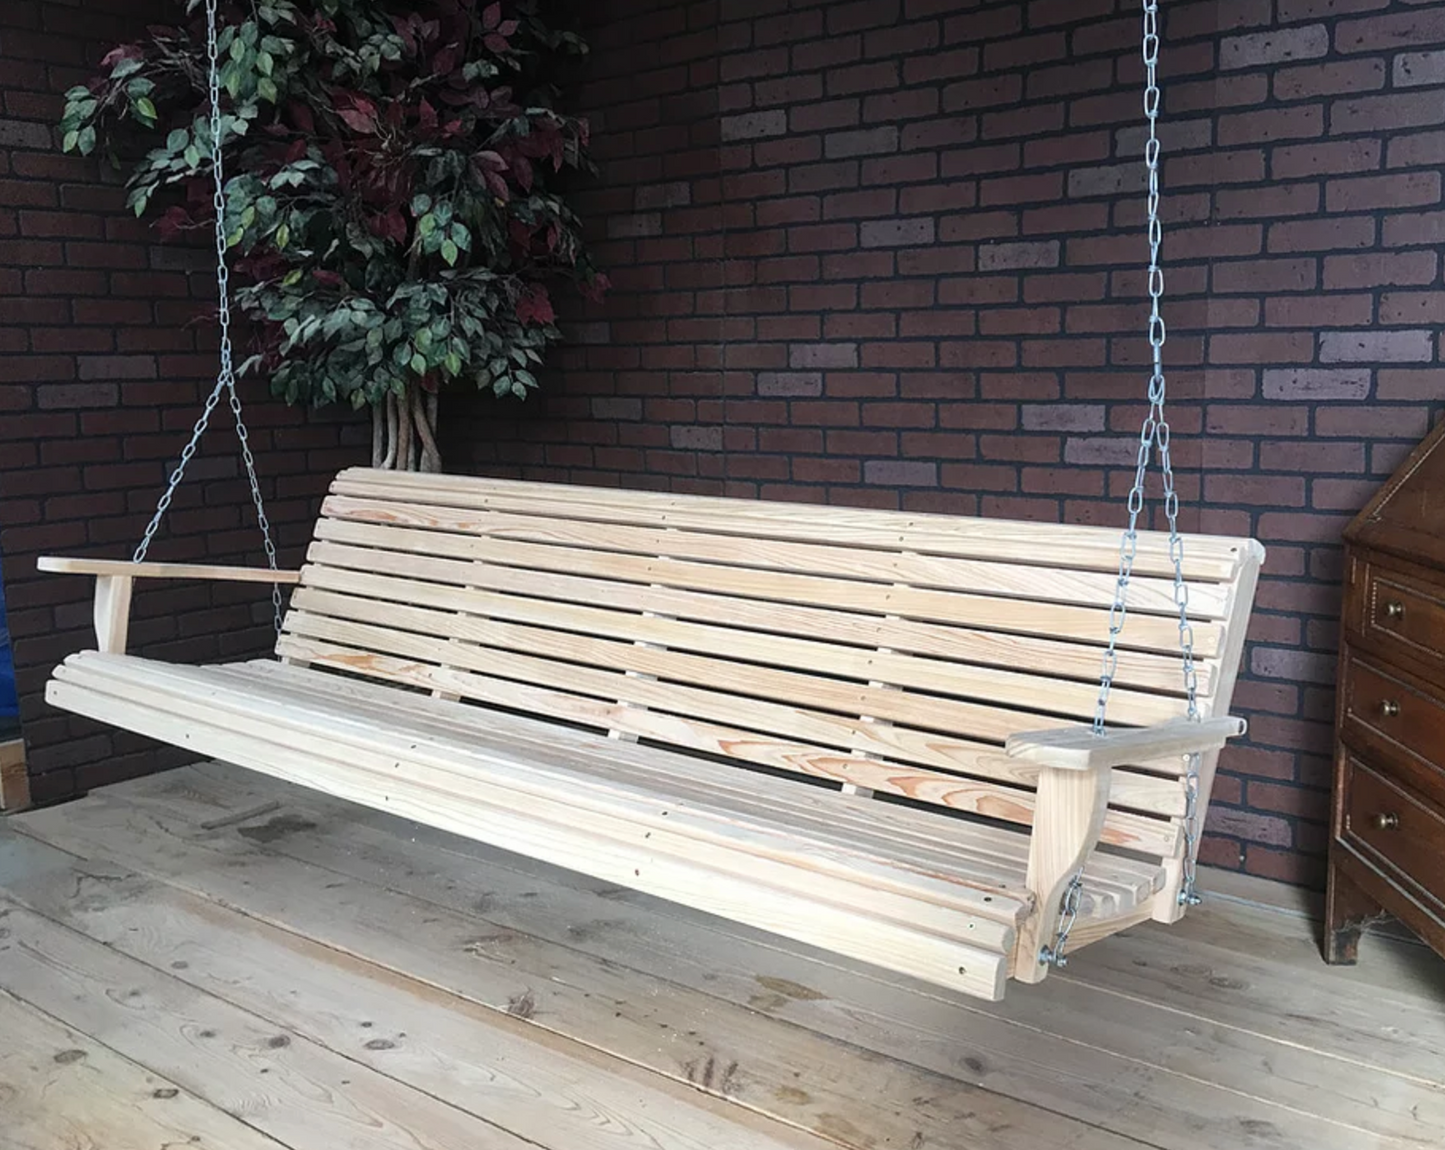 LA Swings Inc. 7ft. Cypress Regular Porch Swing - LEAD TIME TO SHIP  (UNFINISHED 7 BUSINESS DAYS) - (FINISHED 15 BUSINESS DAYS)